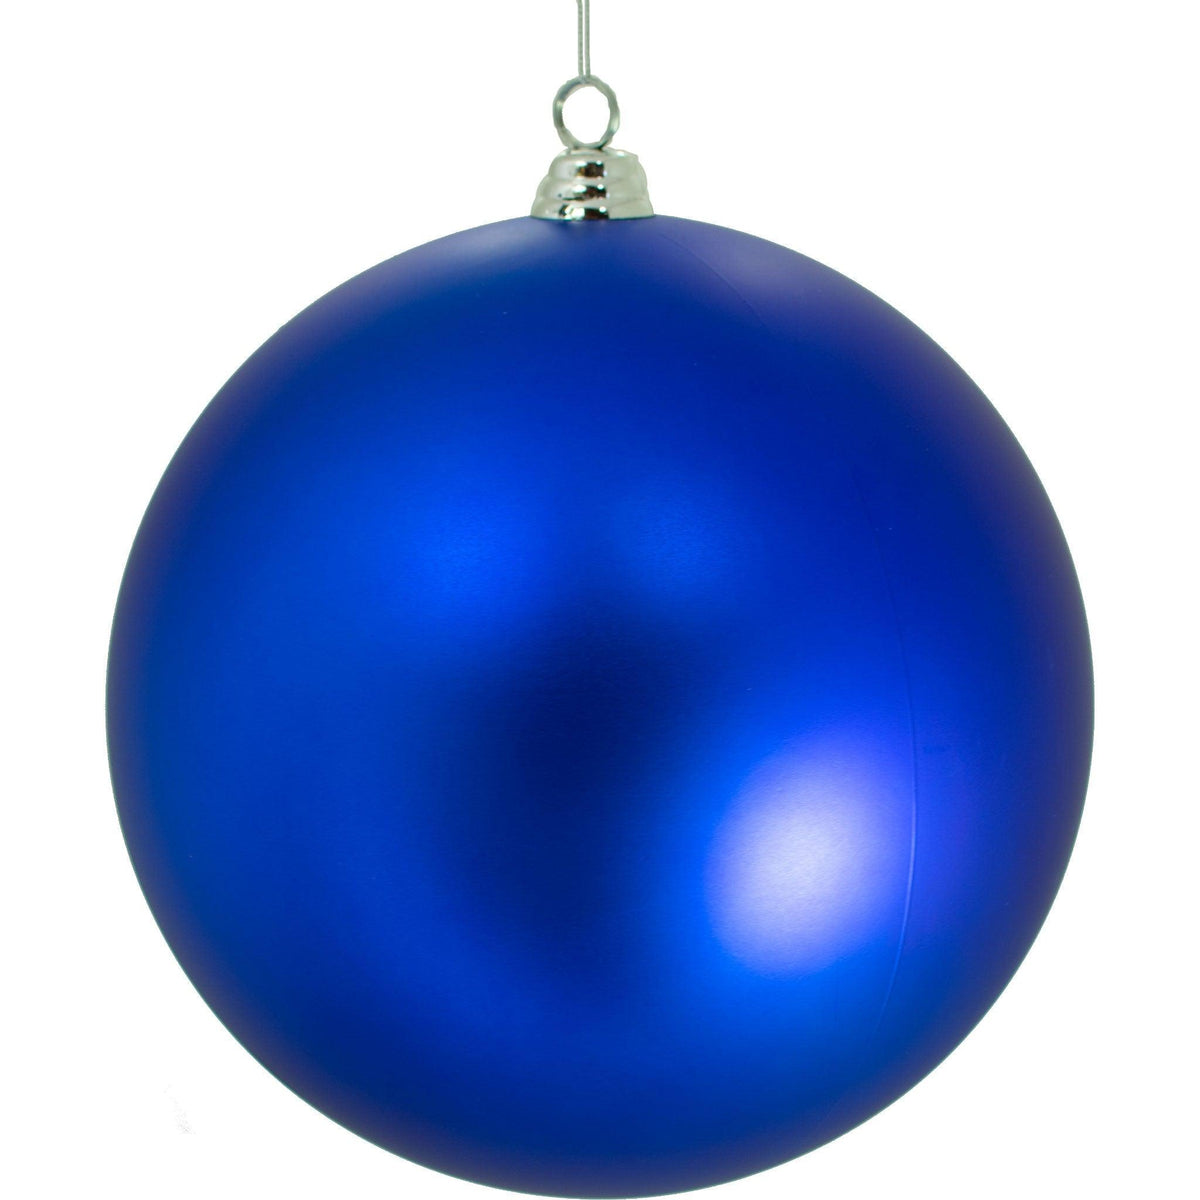 Lee Display offers brand new Shiny Matte Blue Plastic Ball Ornaments at wholesale prices for affordable Christmas Tree Hanging and Holiday Decorating on sale at leedisplay.com